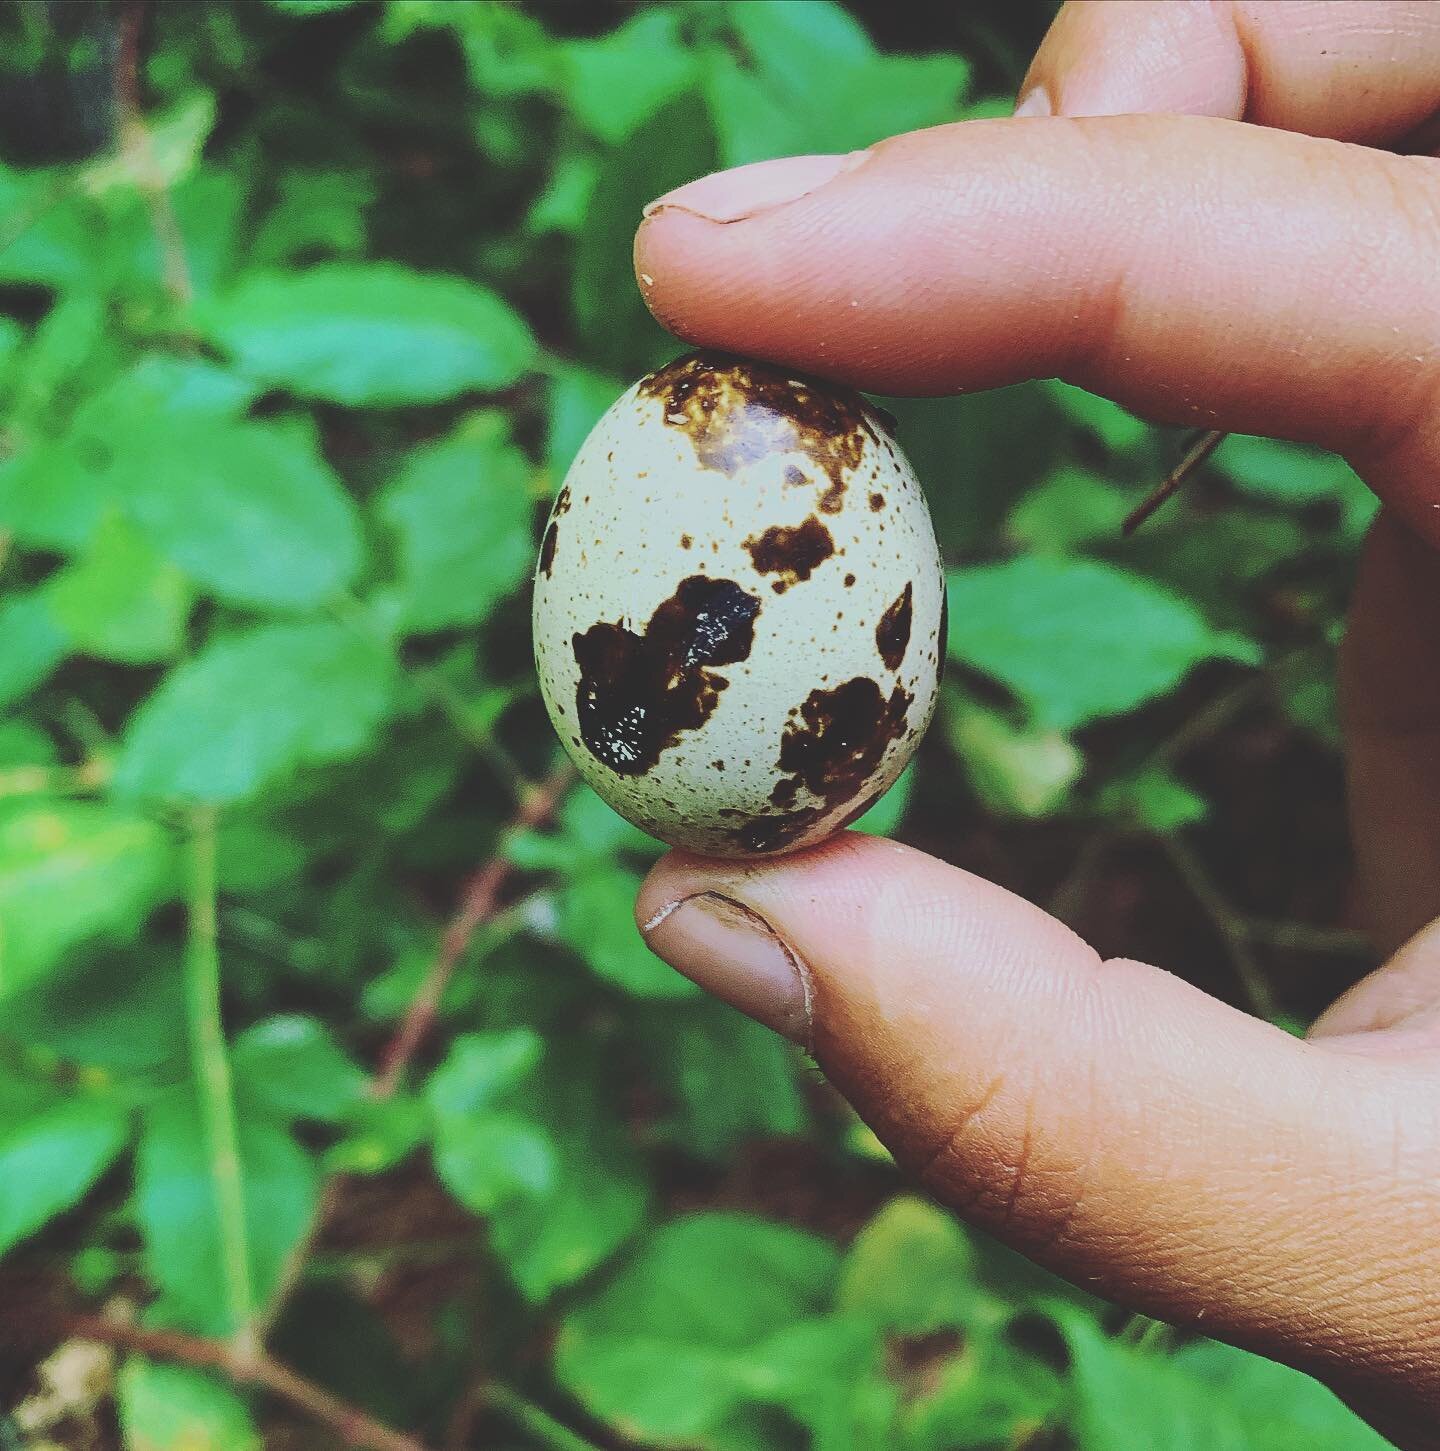 🌿QUAIL EGGS🌿

Extra super delicious and nutritious! These sweet little eggs are a fraction of the size of a chicken egg, yet packed full of flavor and nutrients! 

I have been raising quail for 4 years, and they have been a joy! So much so that I w